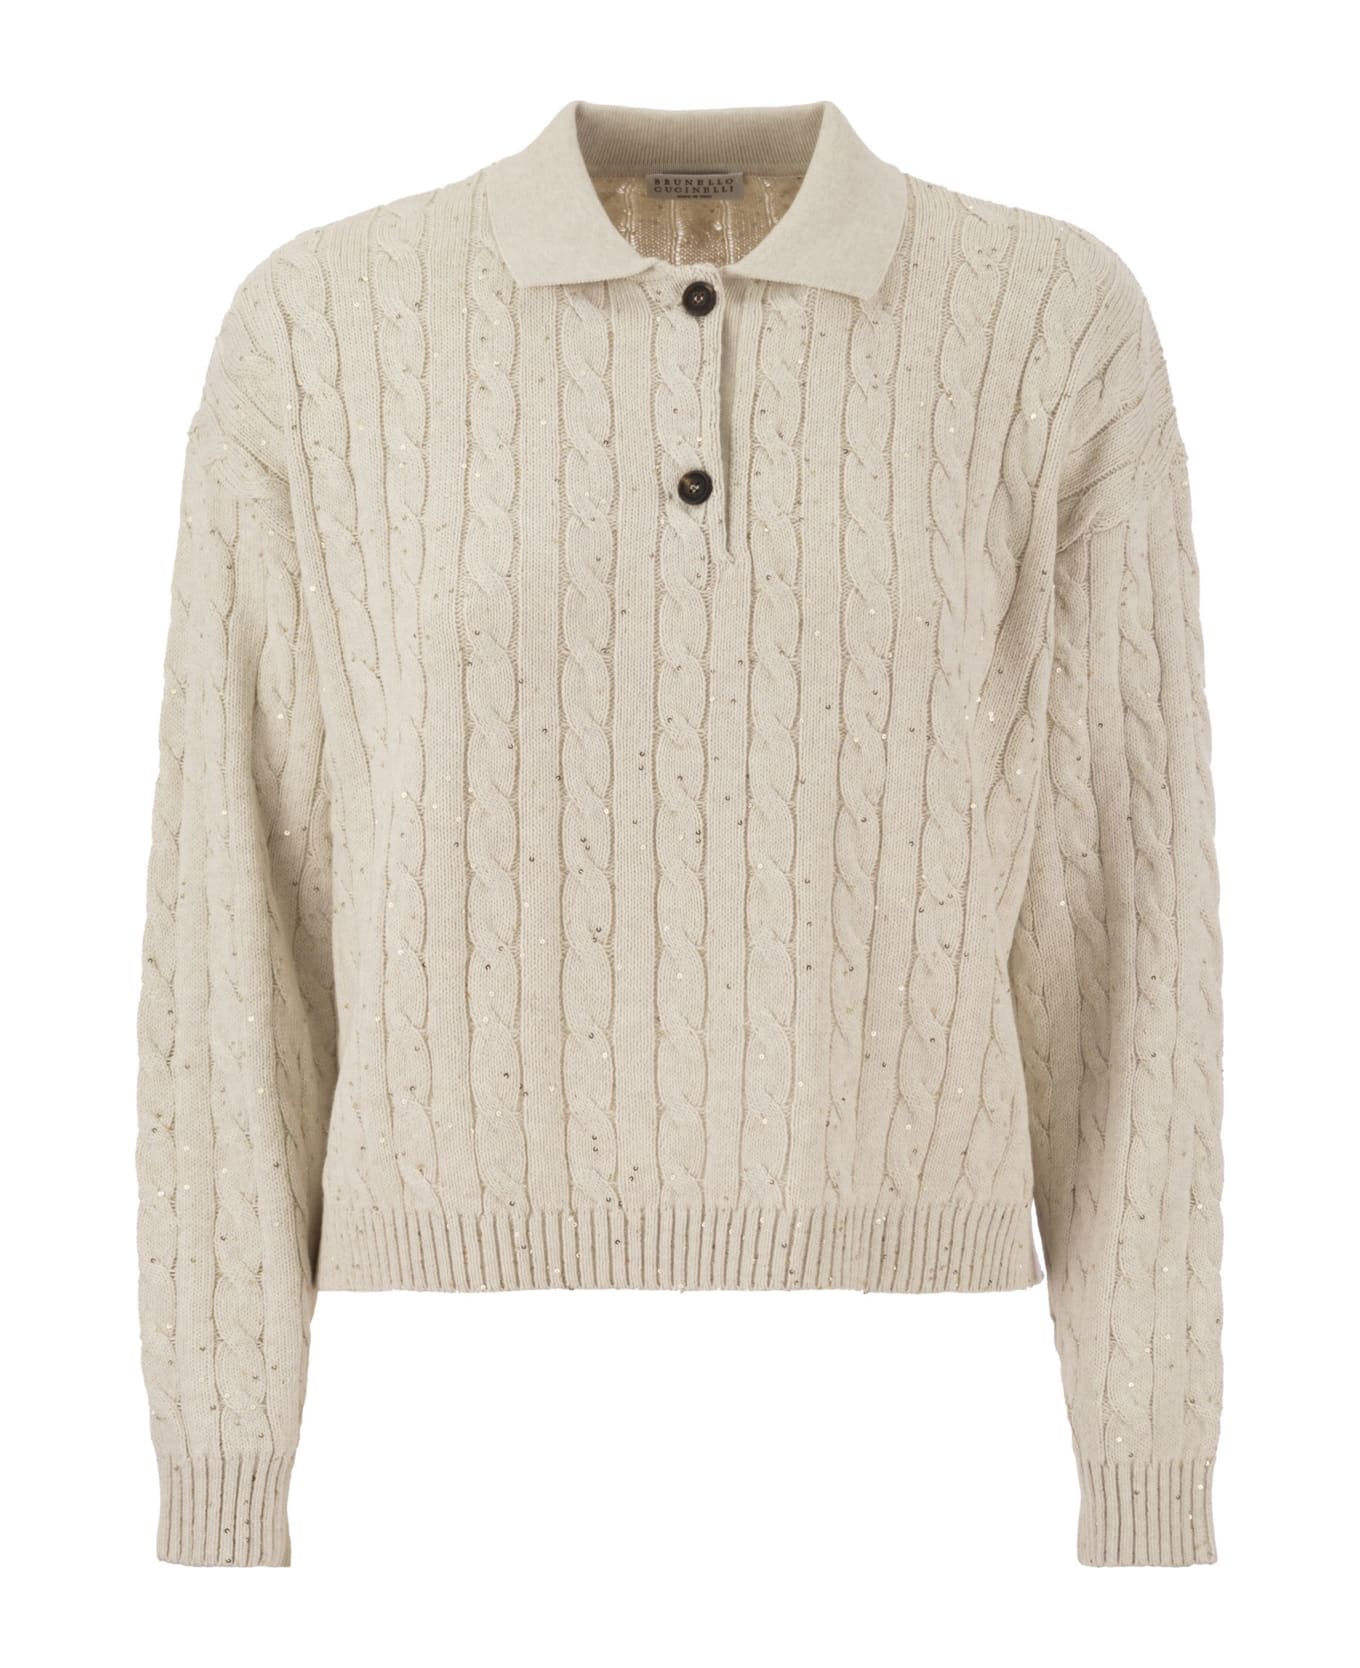 Brunello Cucinelli Dazzling Cables Cotton Polo-style Shirt - Beige ニットウェア